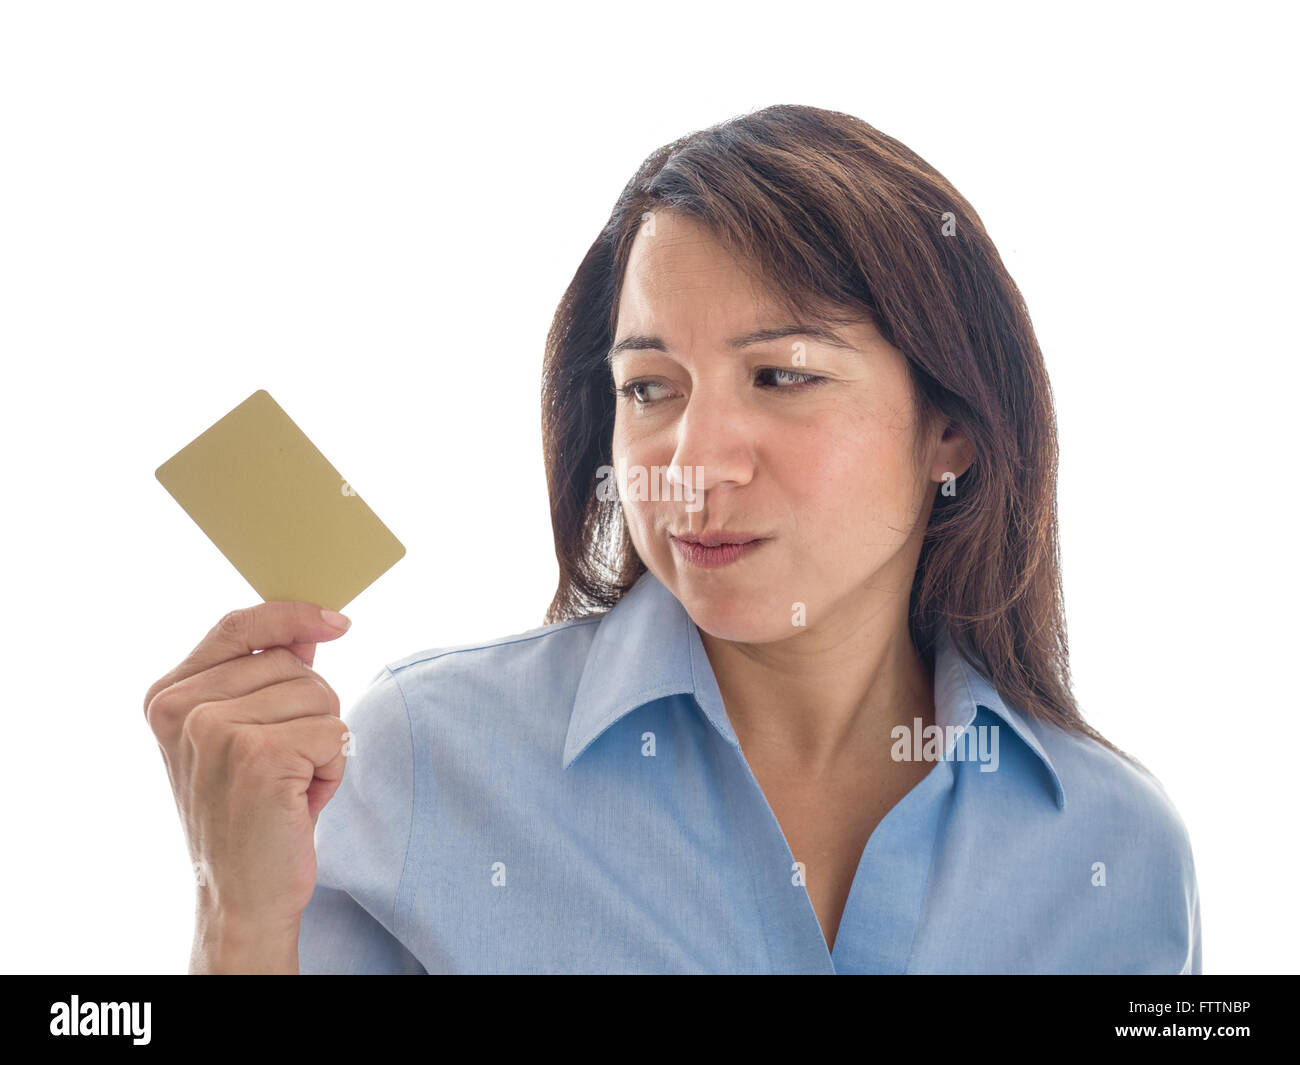 Photograph of a young mixed race woman looking warily at her credit card or gift card. Stock Photo